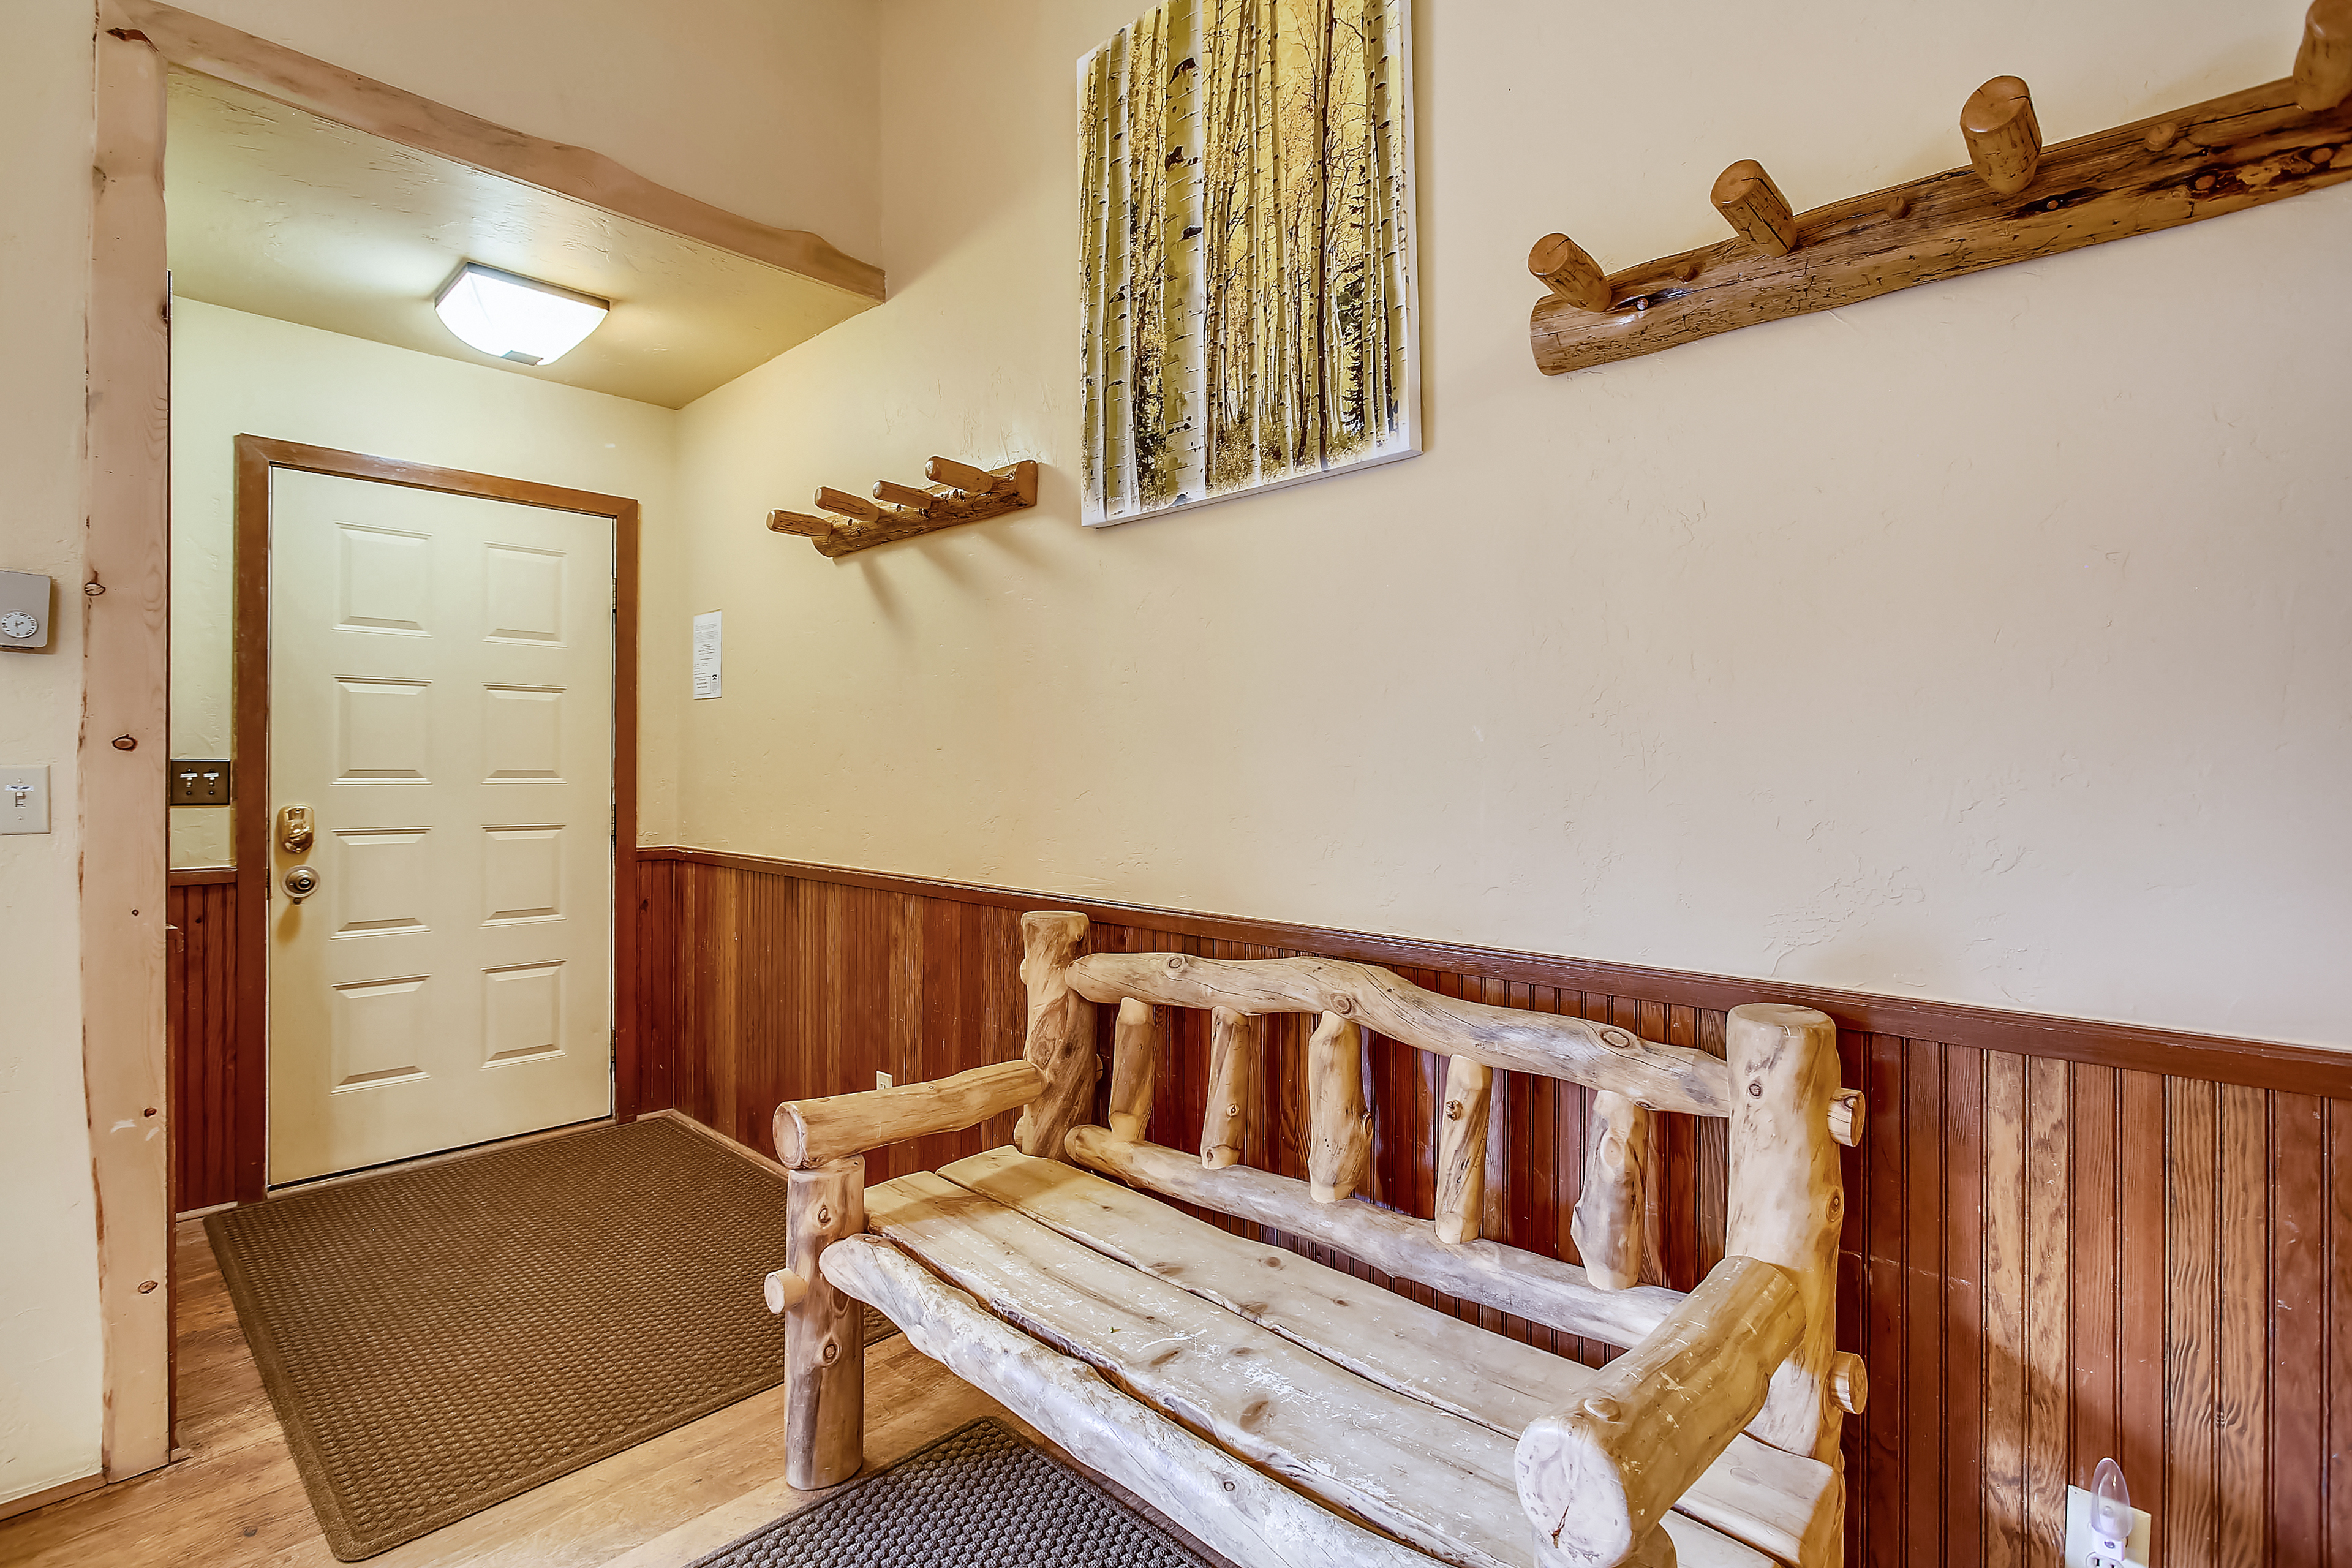 Entryway area with coat hooks and bench - Cedars 53 Breckenridge Vacation Rental